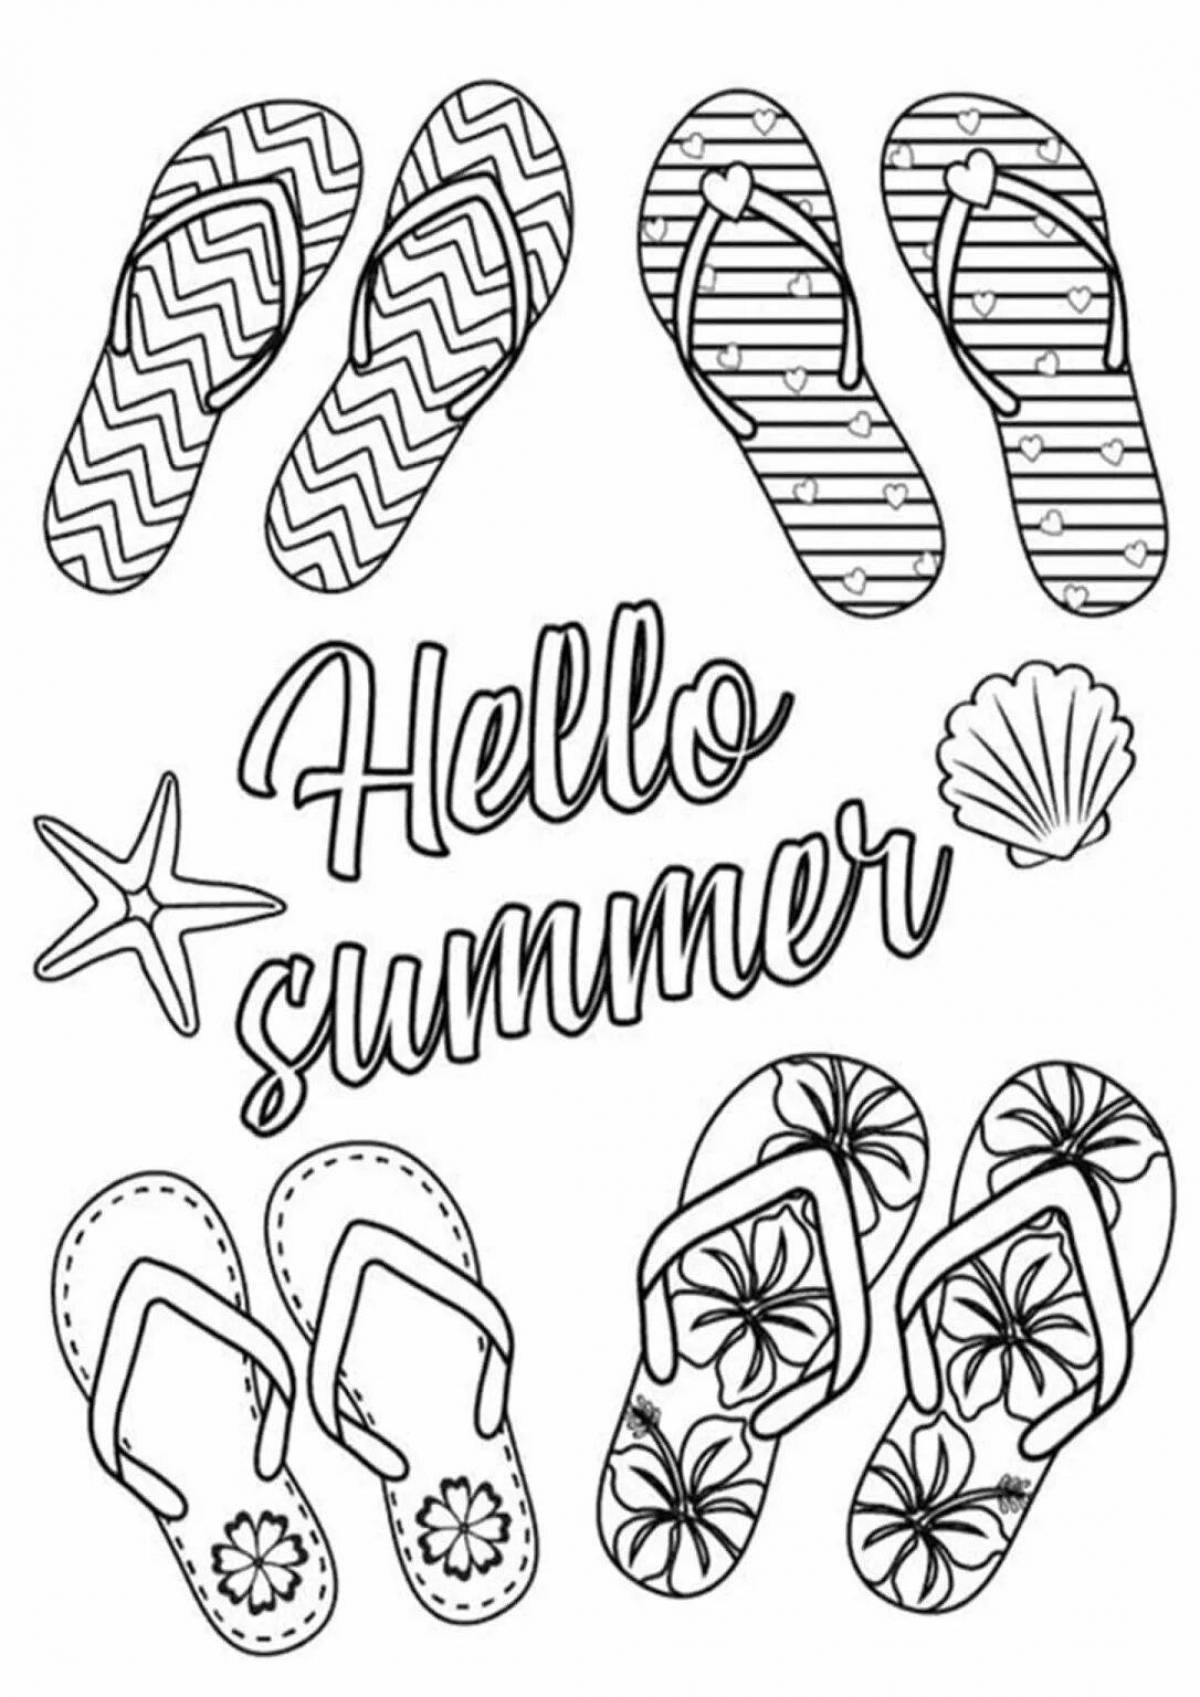 Attractive slippers coloring pages for kids